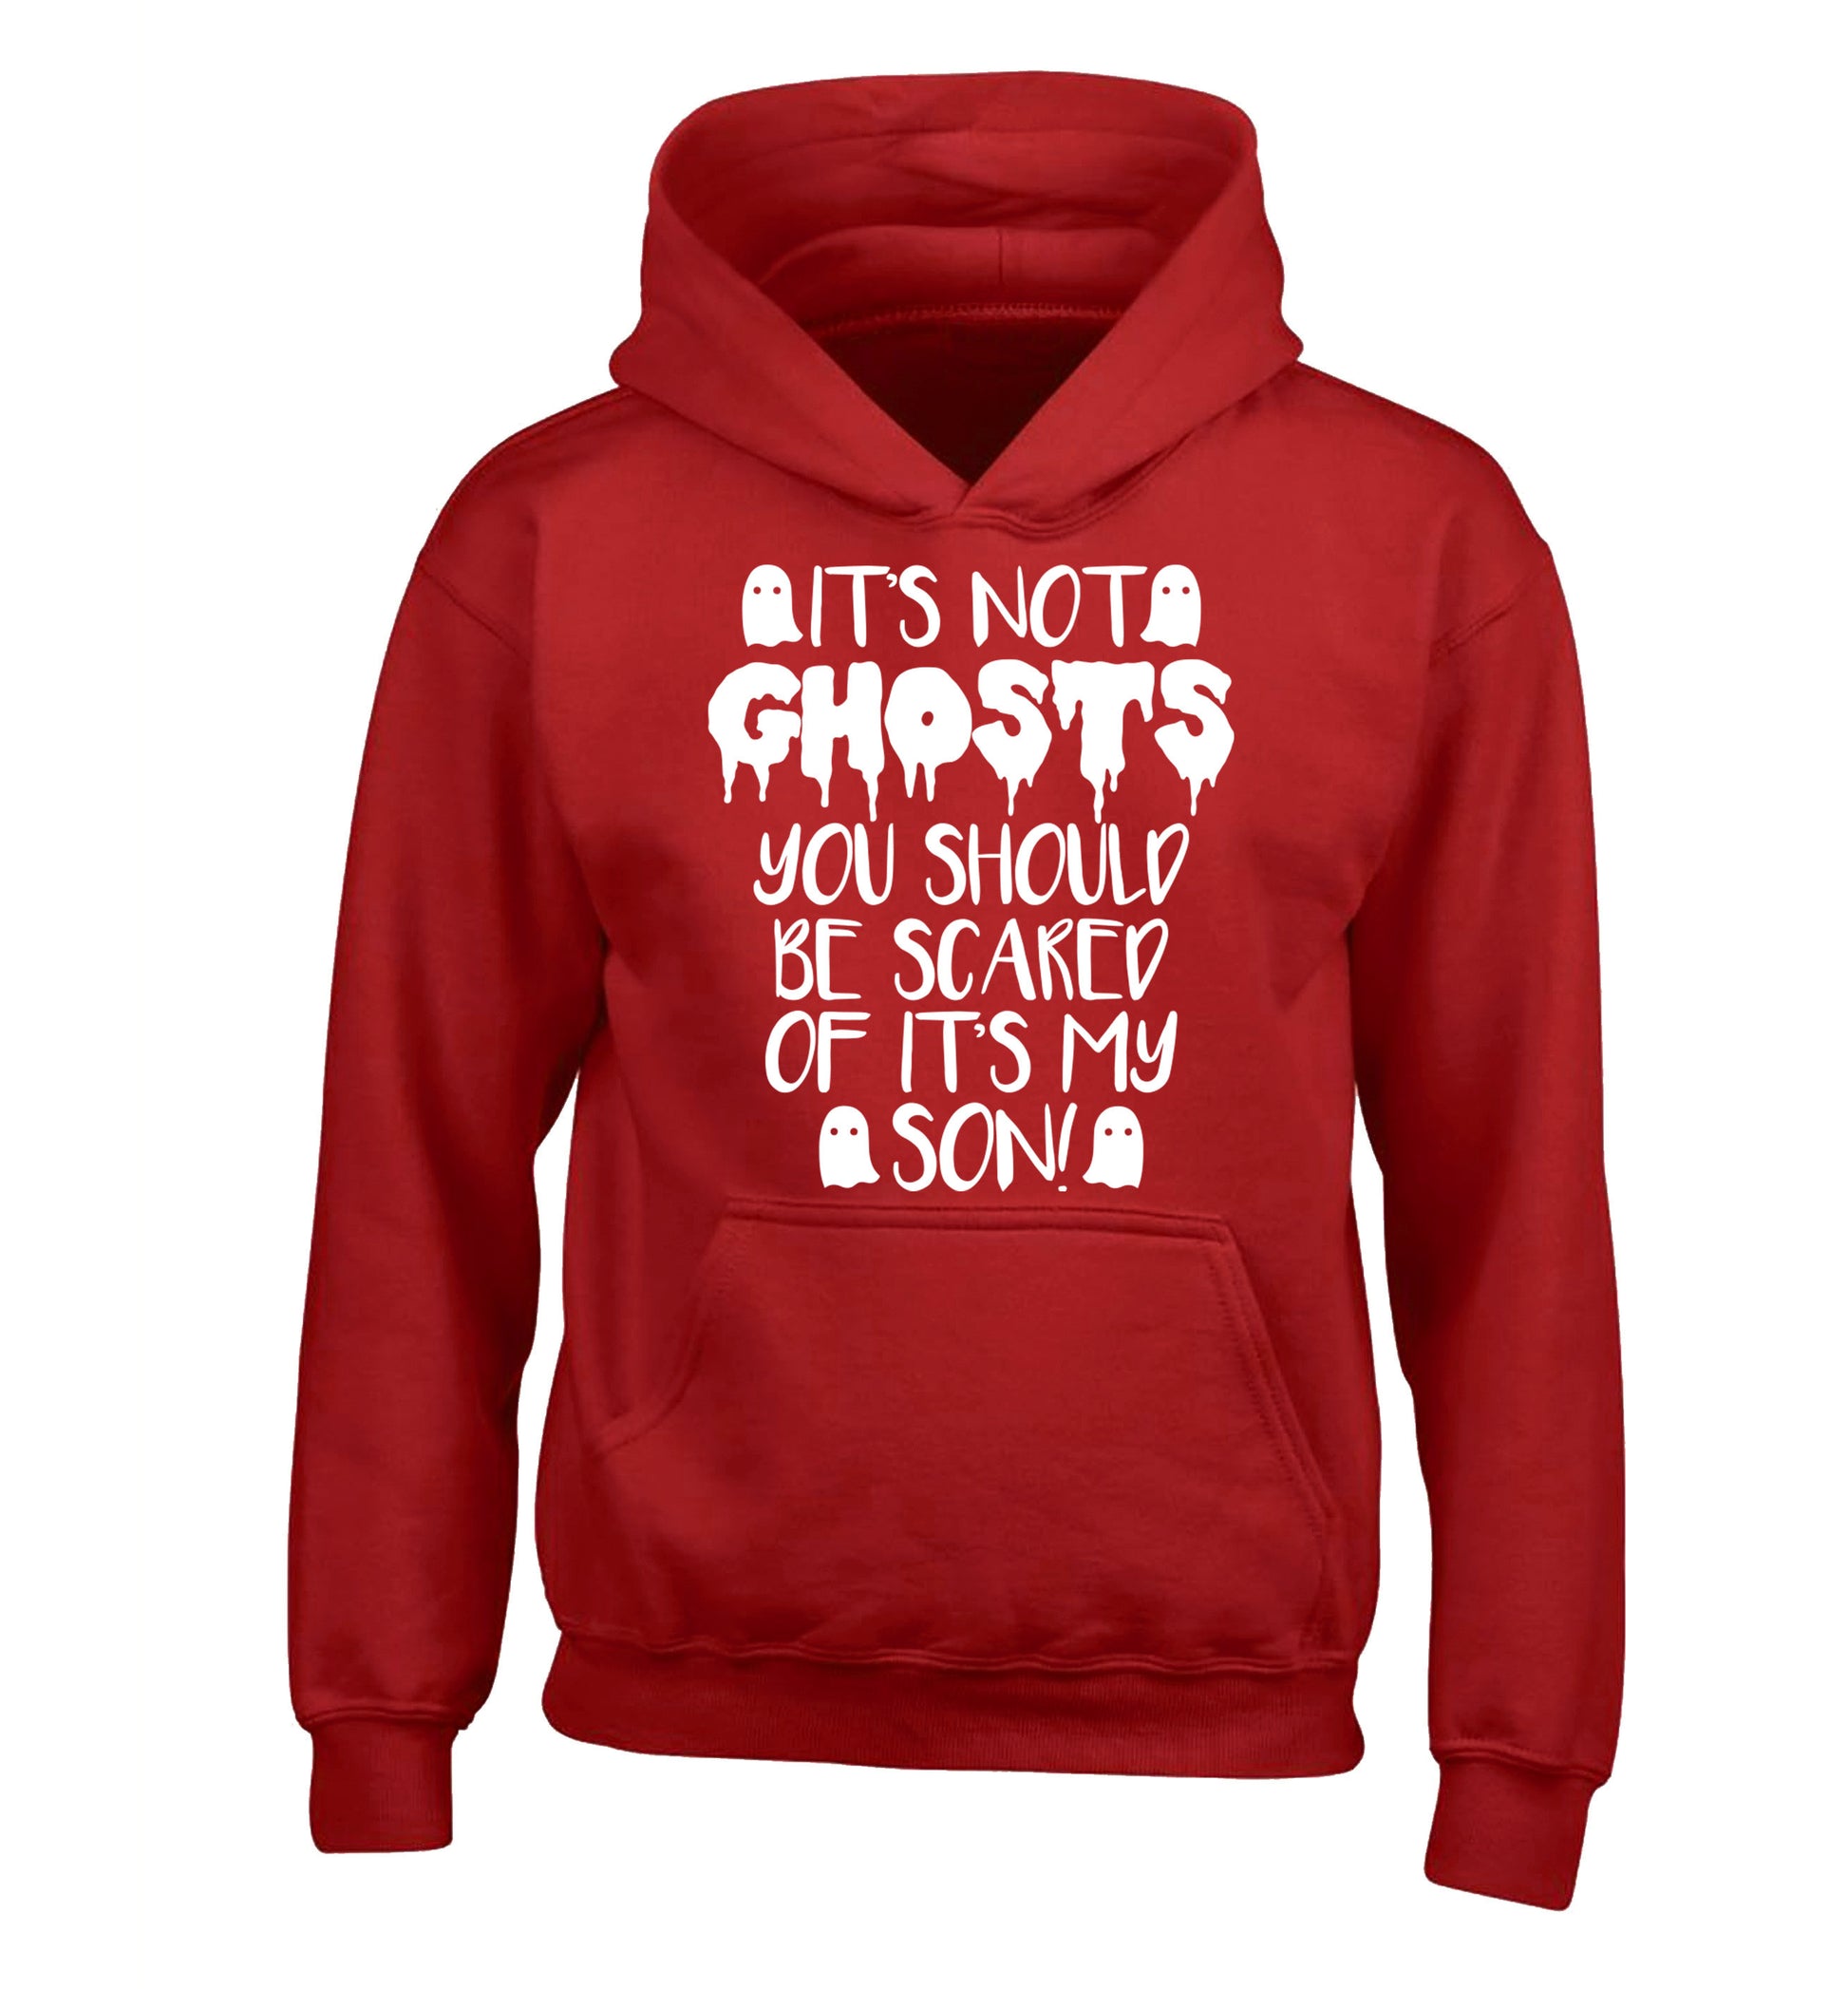 It's not ghosts you should be scared of it's my son! children's red hoodie 12-14 Years